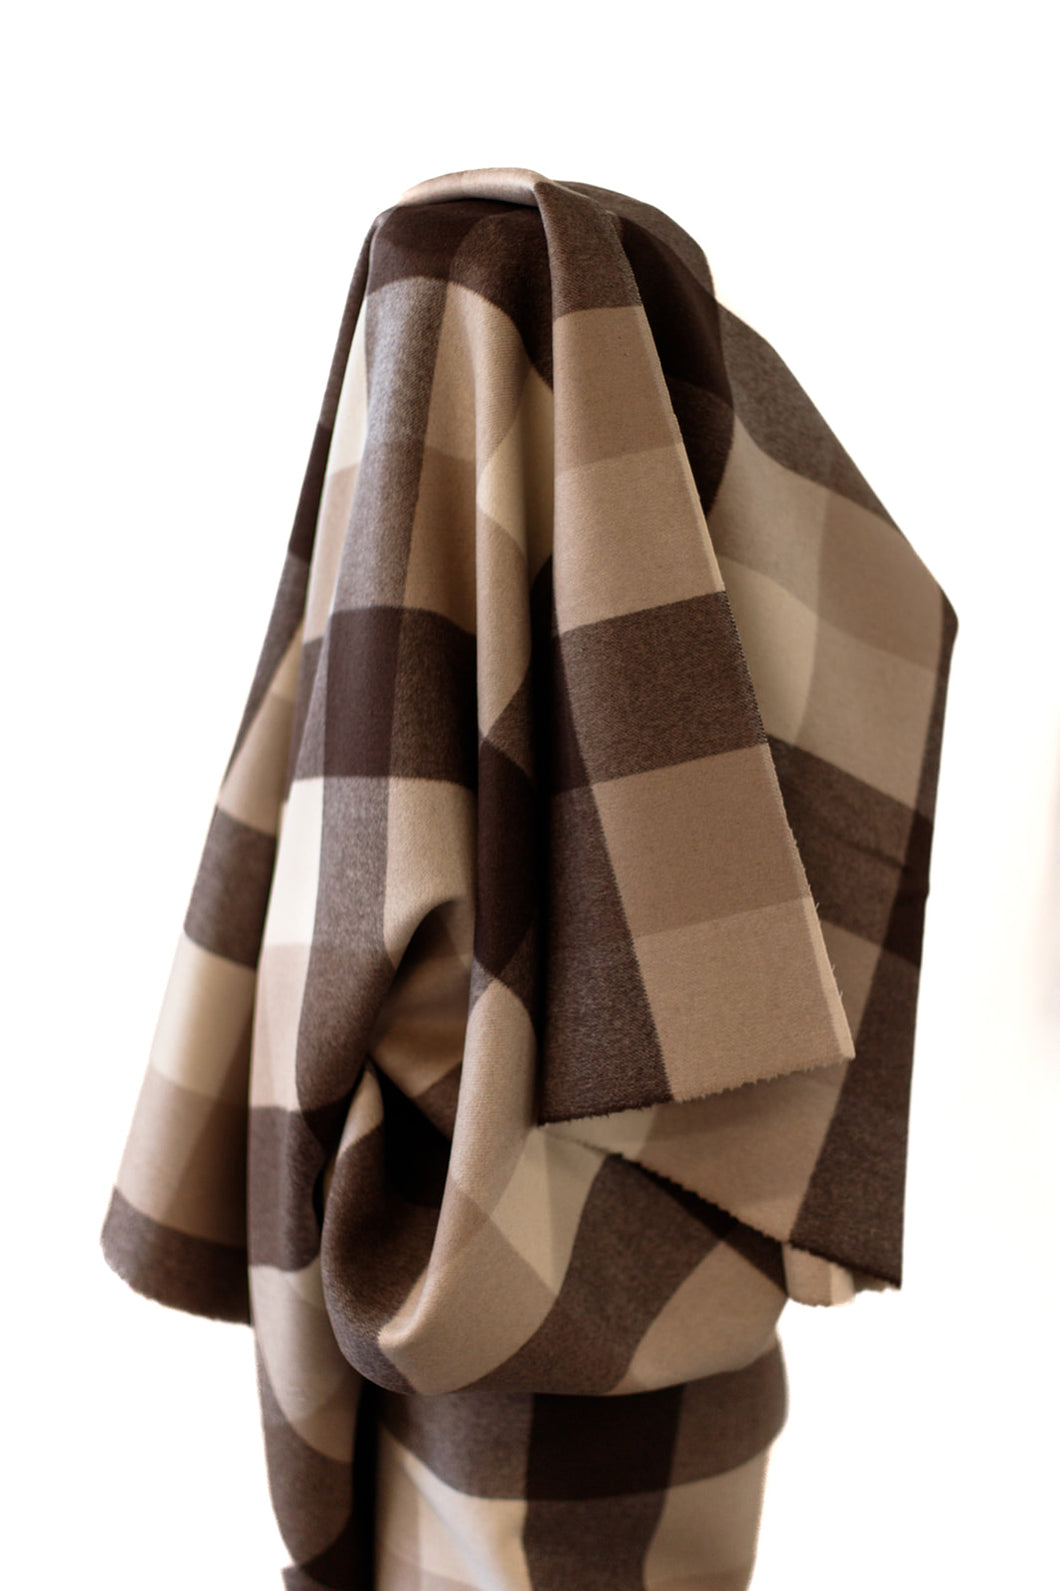 Doubled Sided Brown Check 100% Wool Blend 150 cm w $55 pm